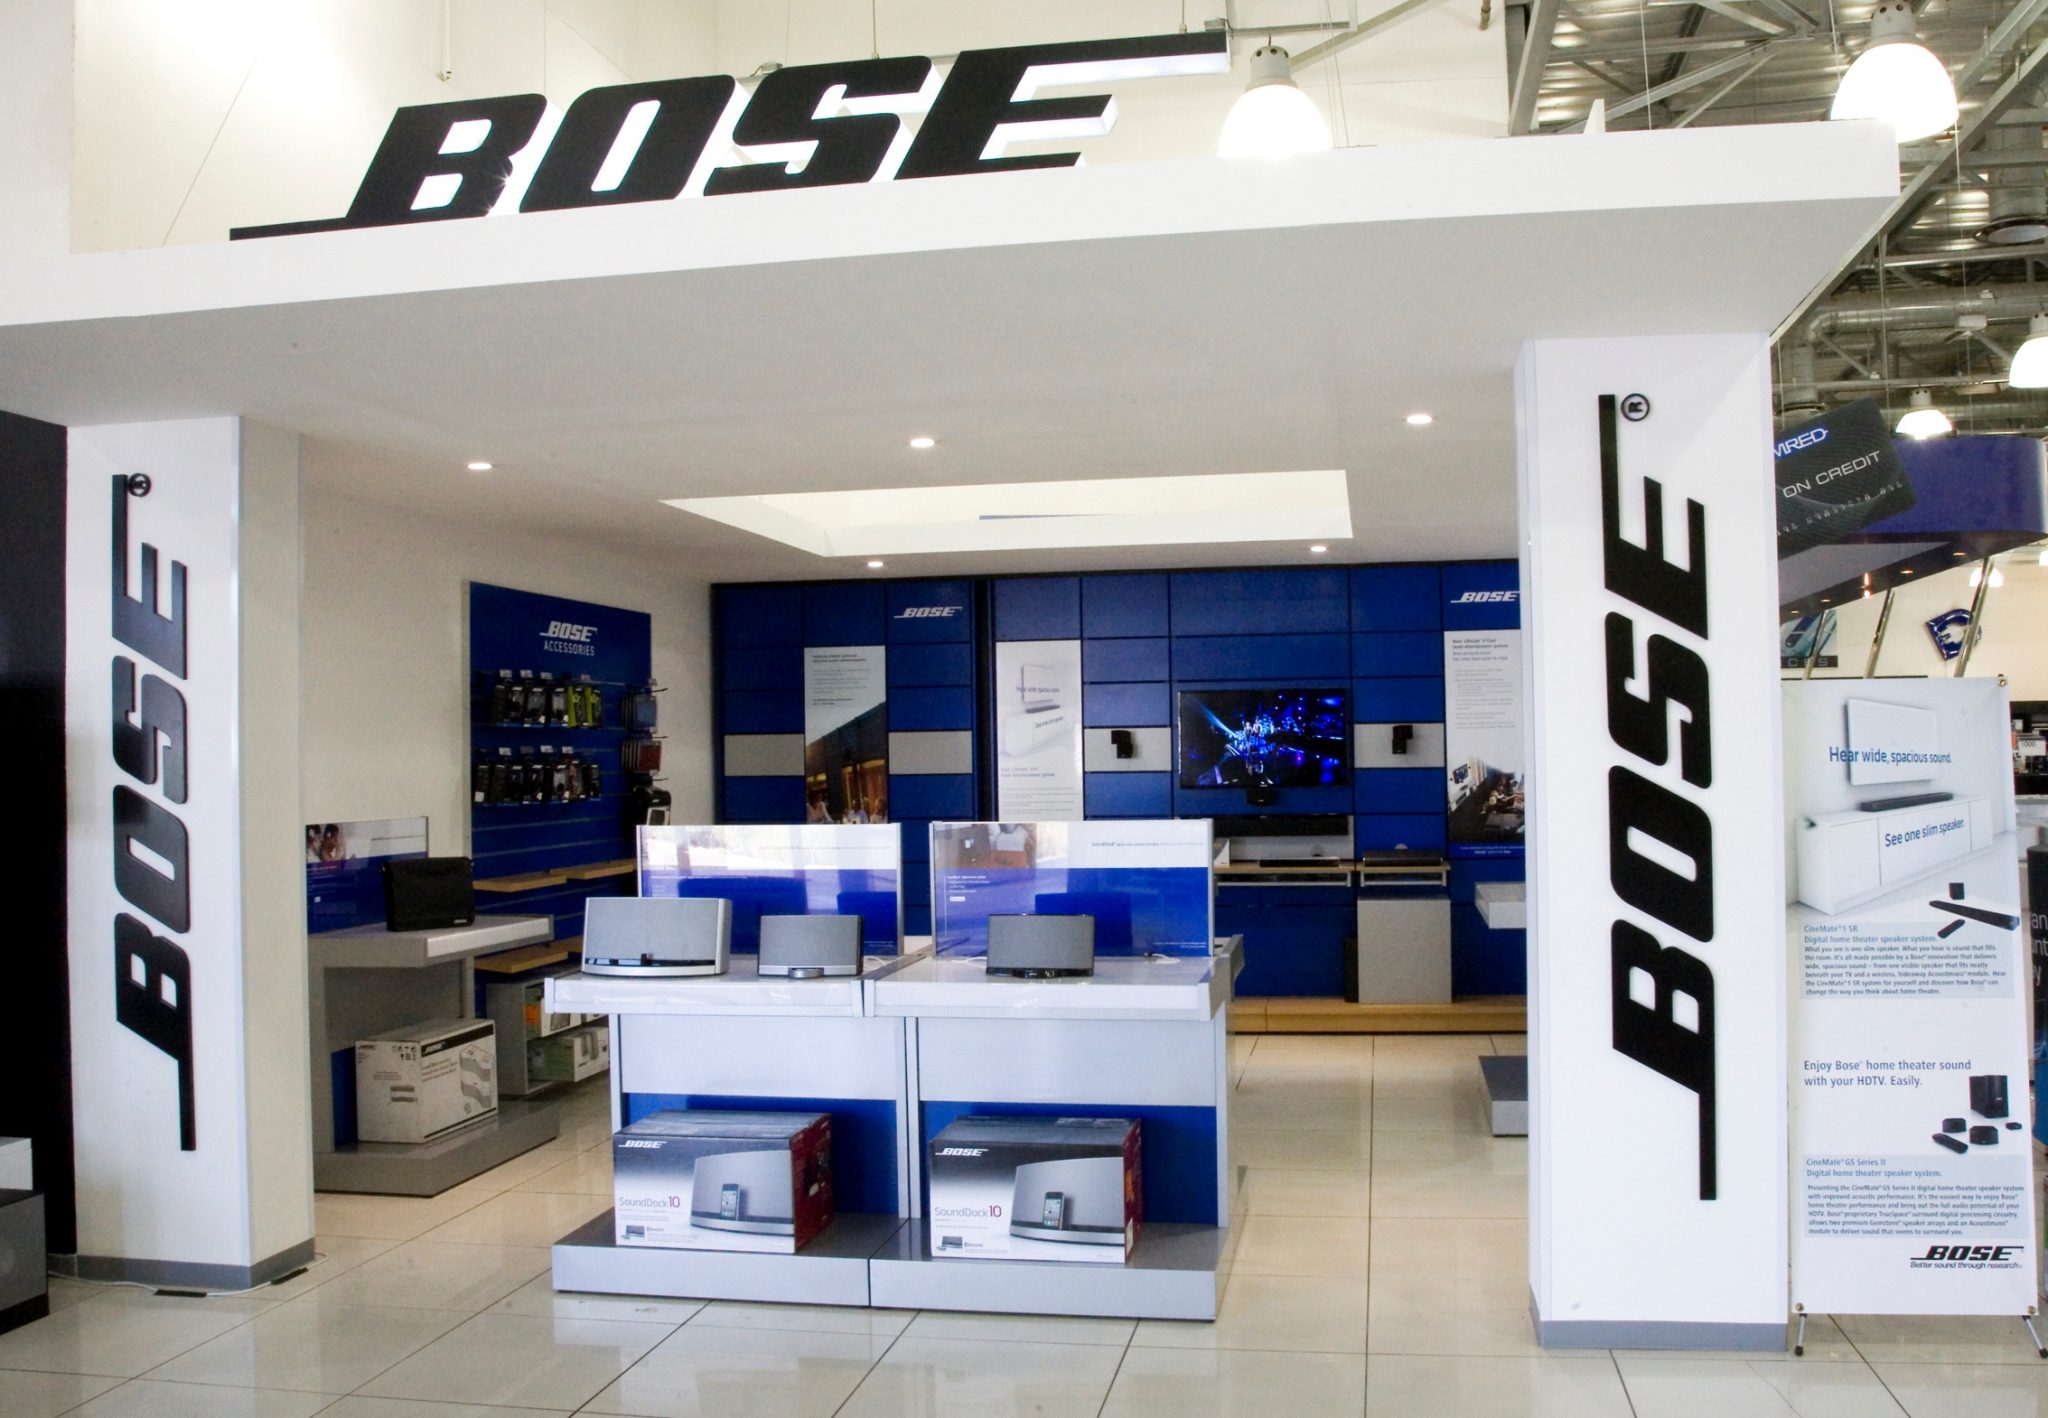 Wired for sound with Bose boutique within stores - Digital Street